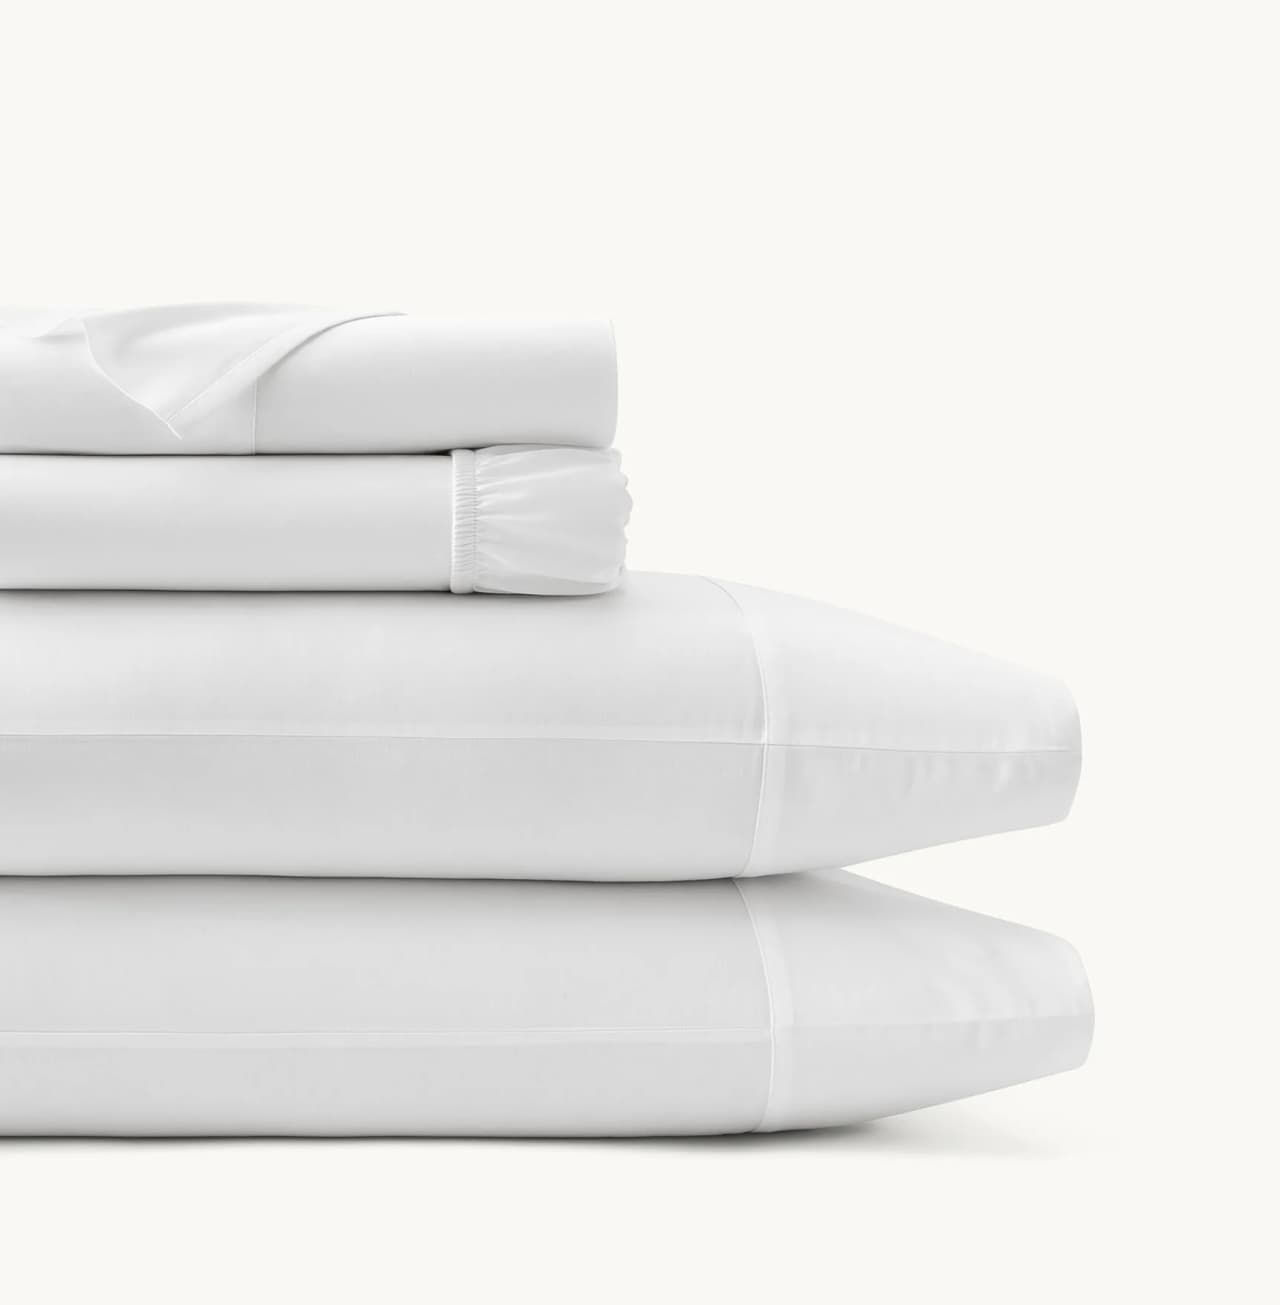 These sheets are wonderfully soft as 100% cotton sheets should be': Today  only, snag 100% Egyptian cotton sheets for just $40 a set